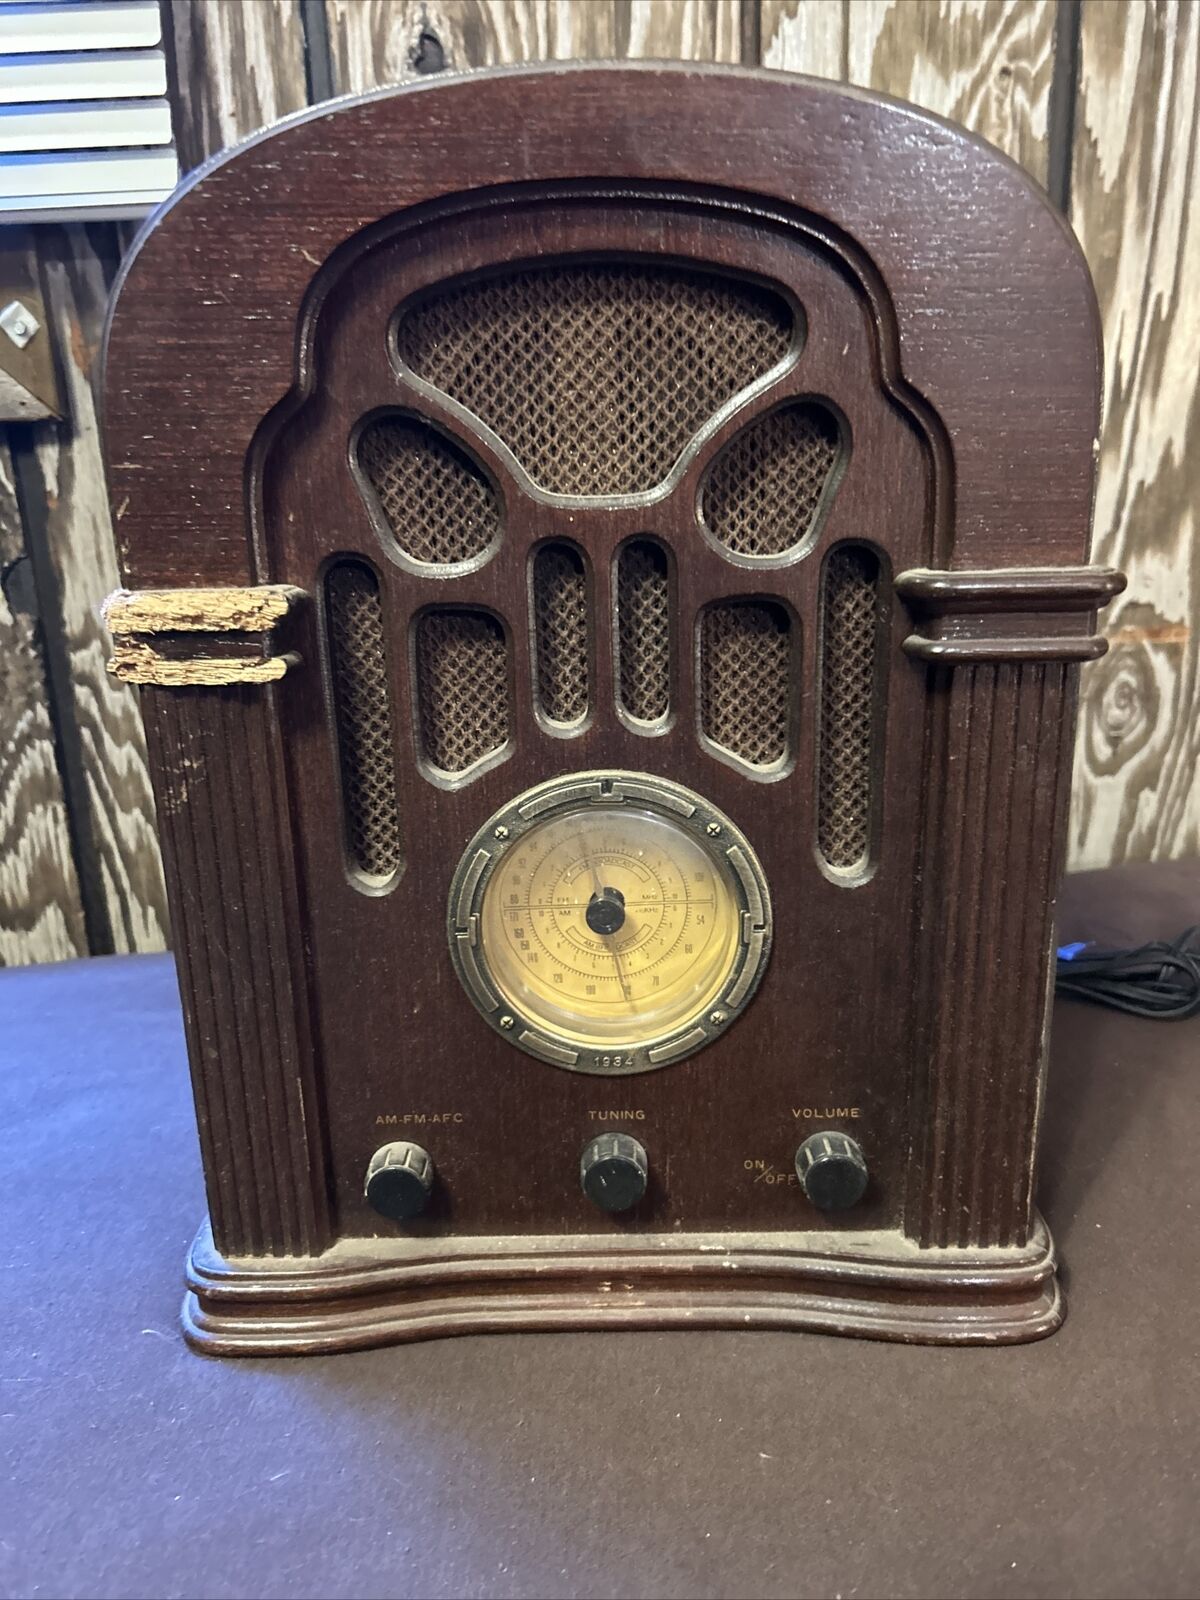 Antique Radio 1934 With Cassette Player And FM Radio Stations.No Longer Tunes In